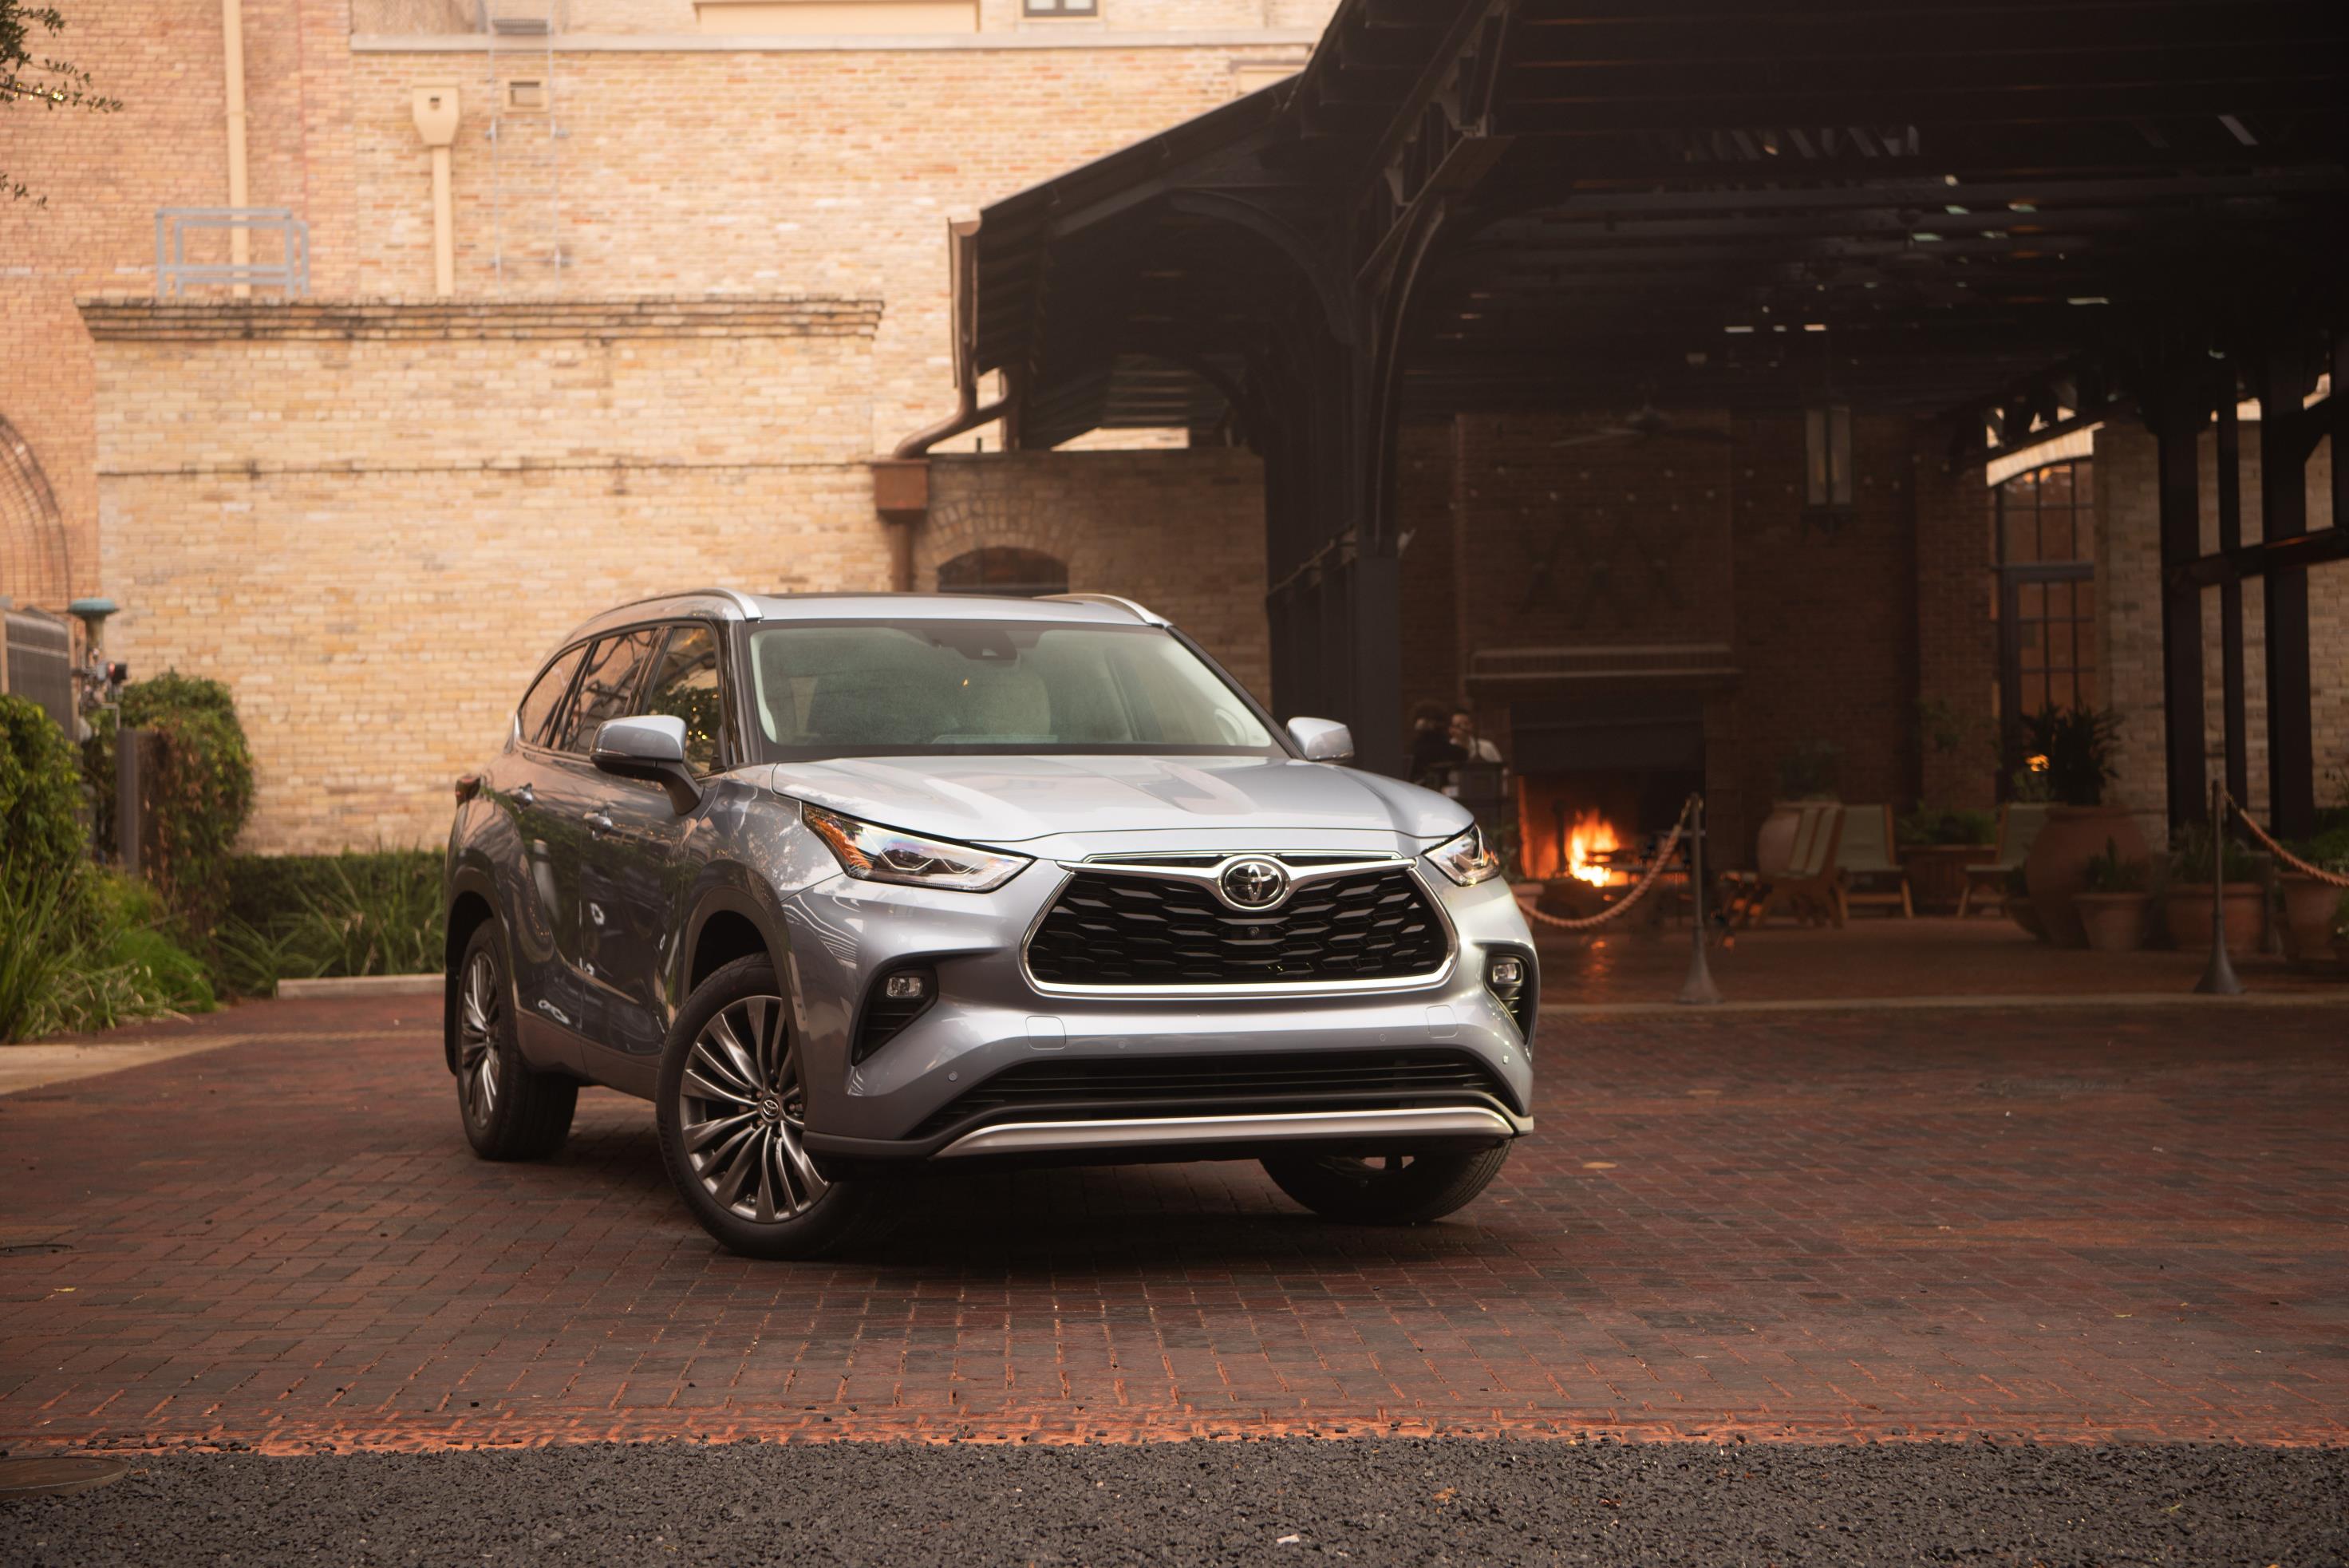 All-New Toyota Highlander Grows Pioneering Crossover Legacy